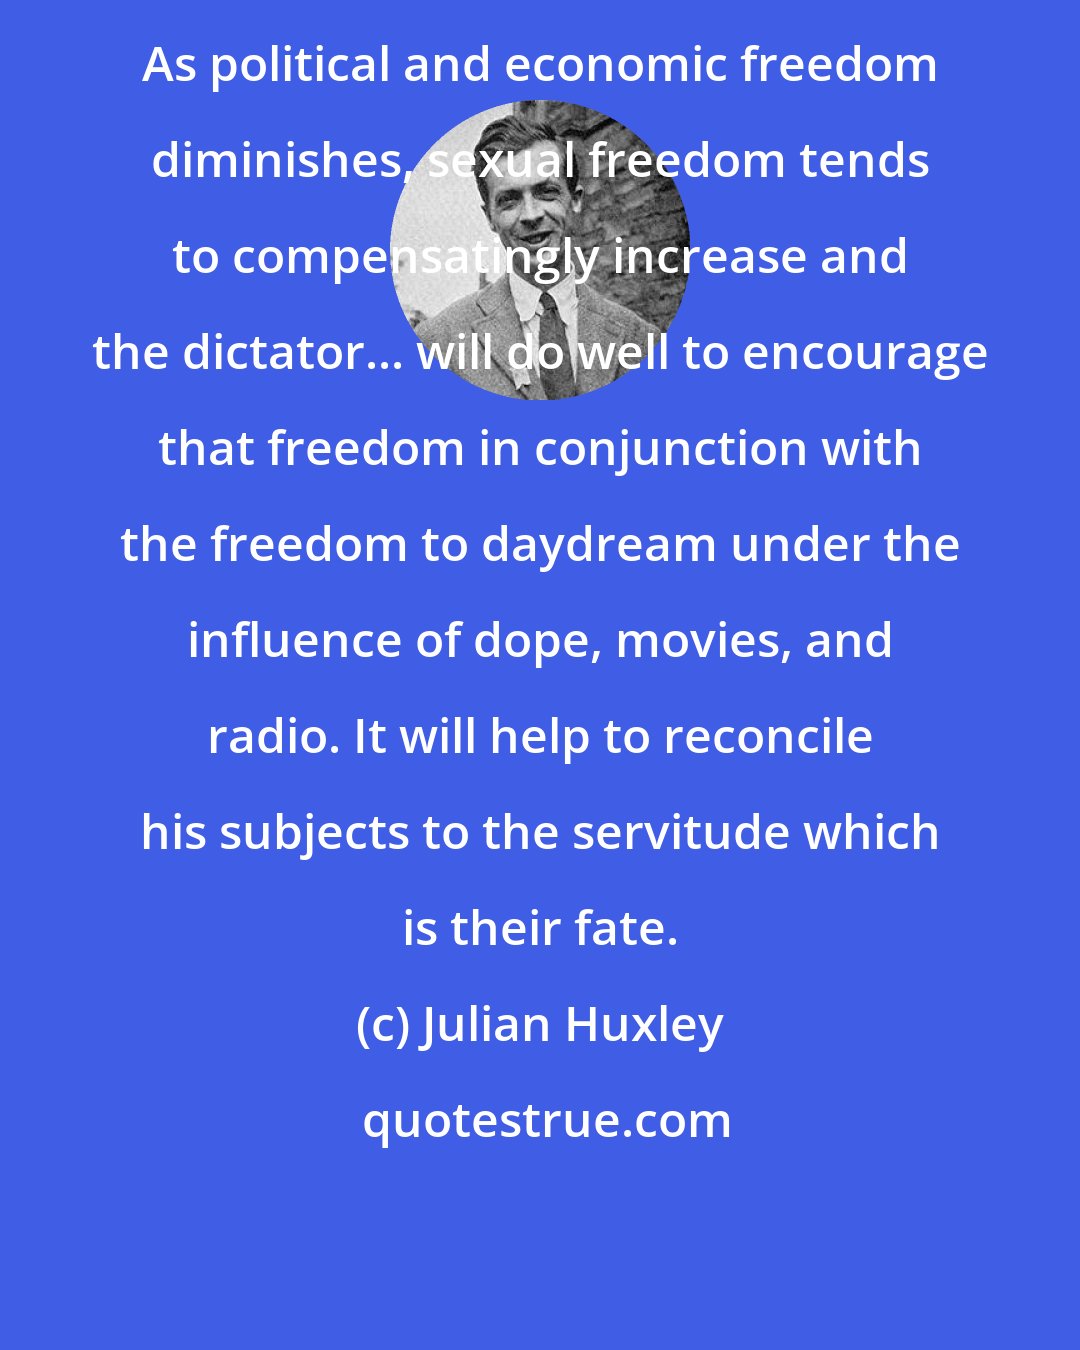 Julian Huxley: As political and economic freedom diminishes, sexual freedom tends to compensatingly increase and the dictator... will do well to encourage that freedom in conjunction with the freedom to daydream under the influence of dope, movies, and radio. It will help to reconcile his subjects to the servitude which is their fate.